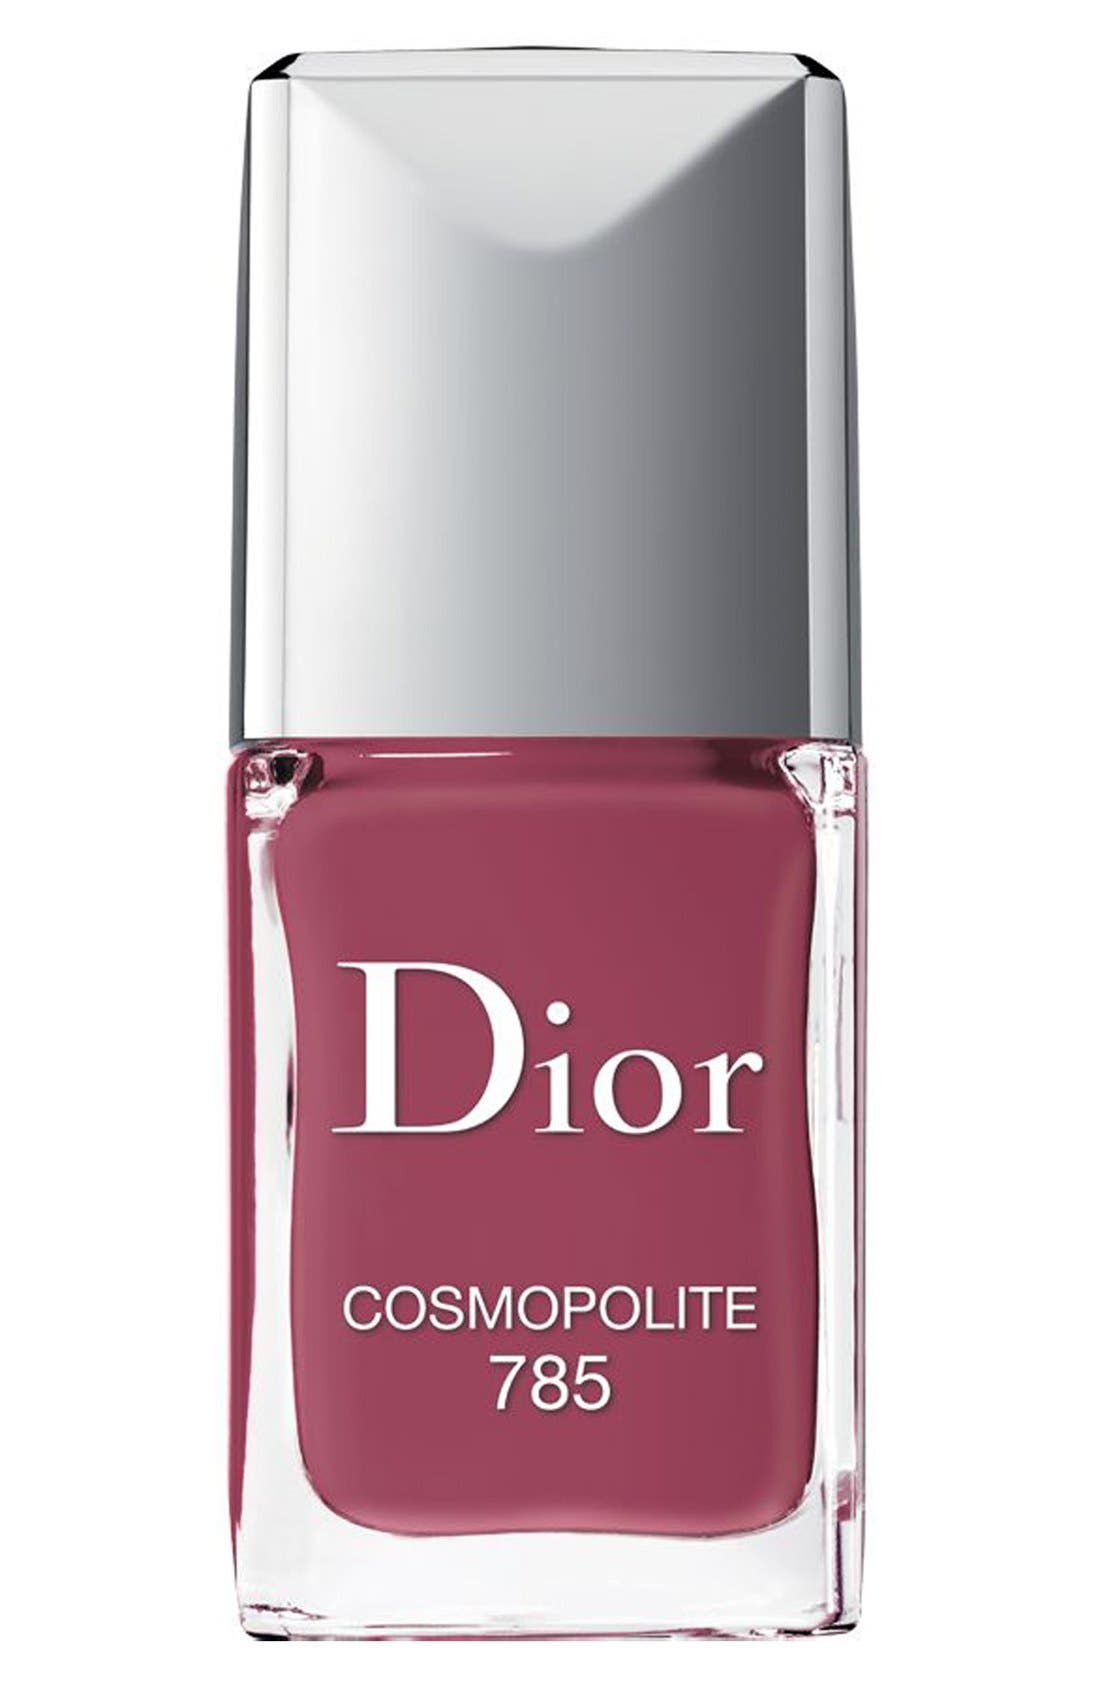 EAN 3348901263795 product image for Dior Vernis Gel Shine & Long Wear Nail Lacquer - 785 Cosmopolite | upcitemdb.com